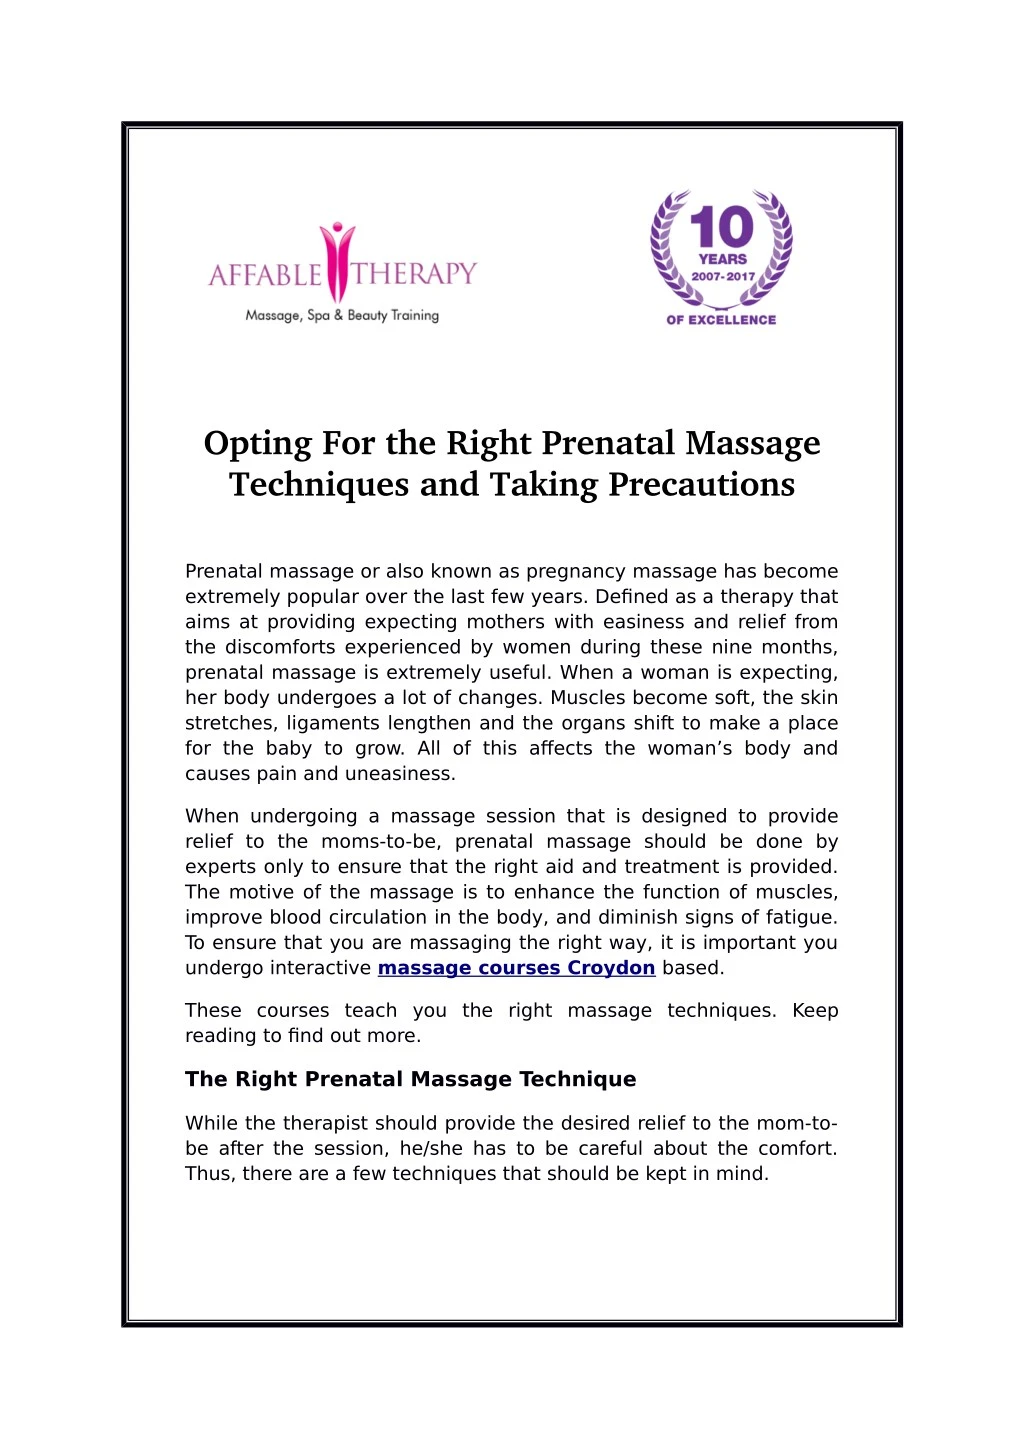 opting for the right prenatal massage techniques